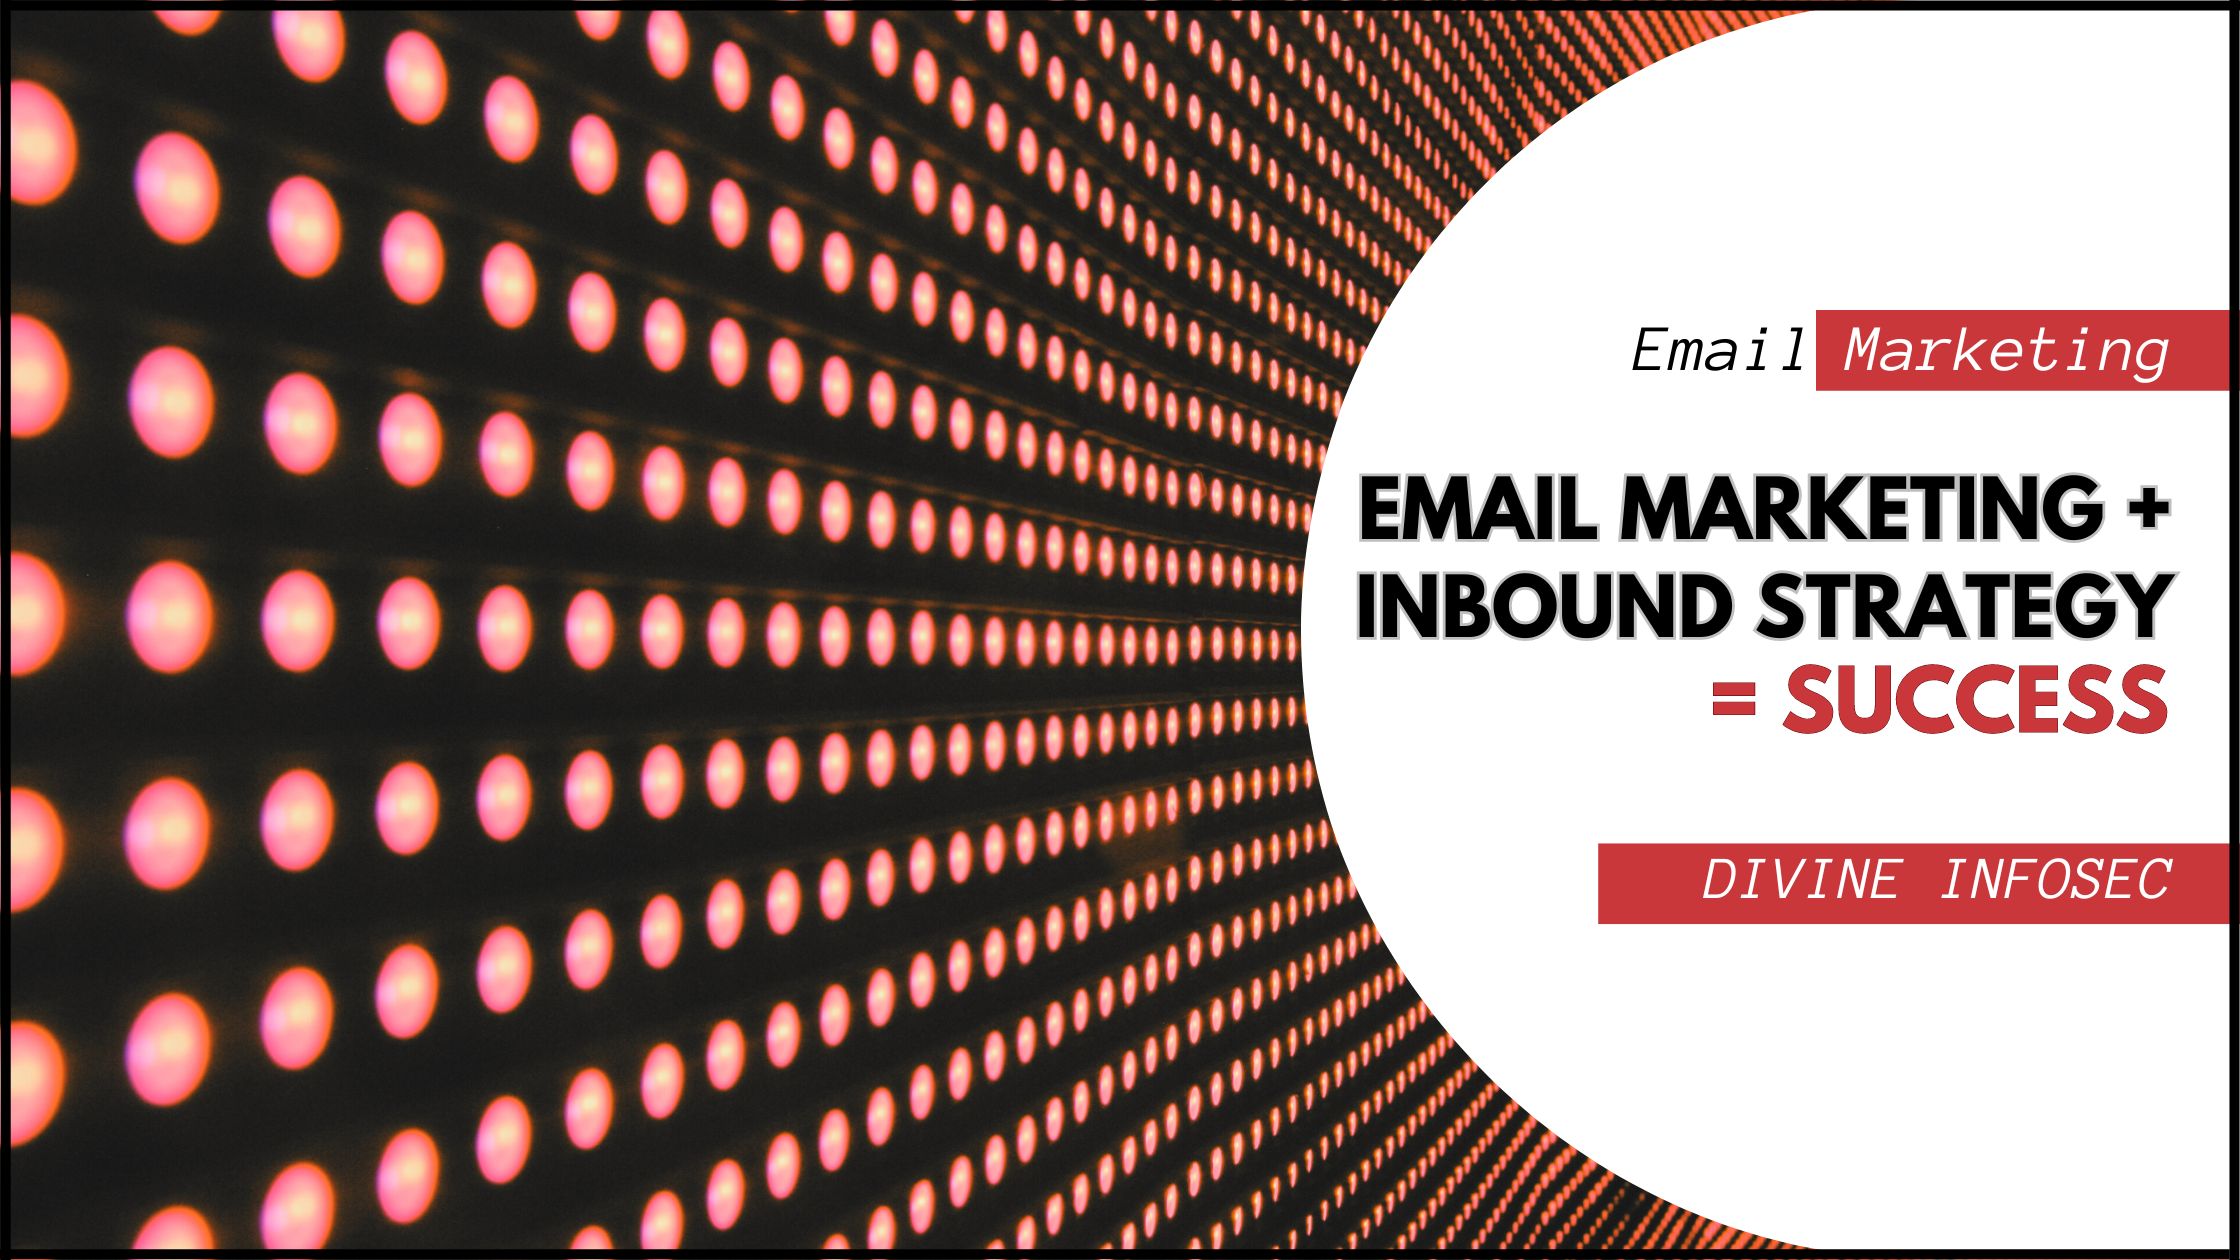 HOW CAN EMAIL MARKETING FUEL YOUR OVERALL INBOUND STRATEGY?